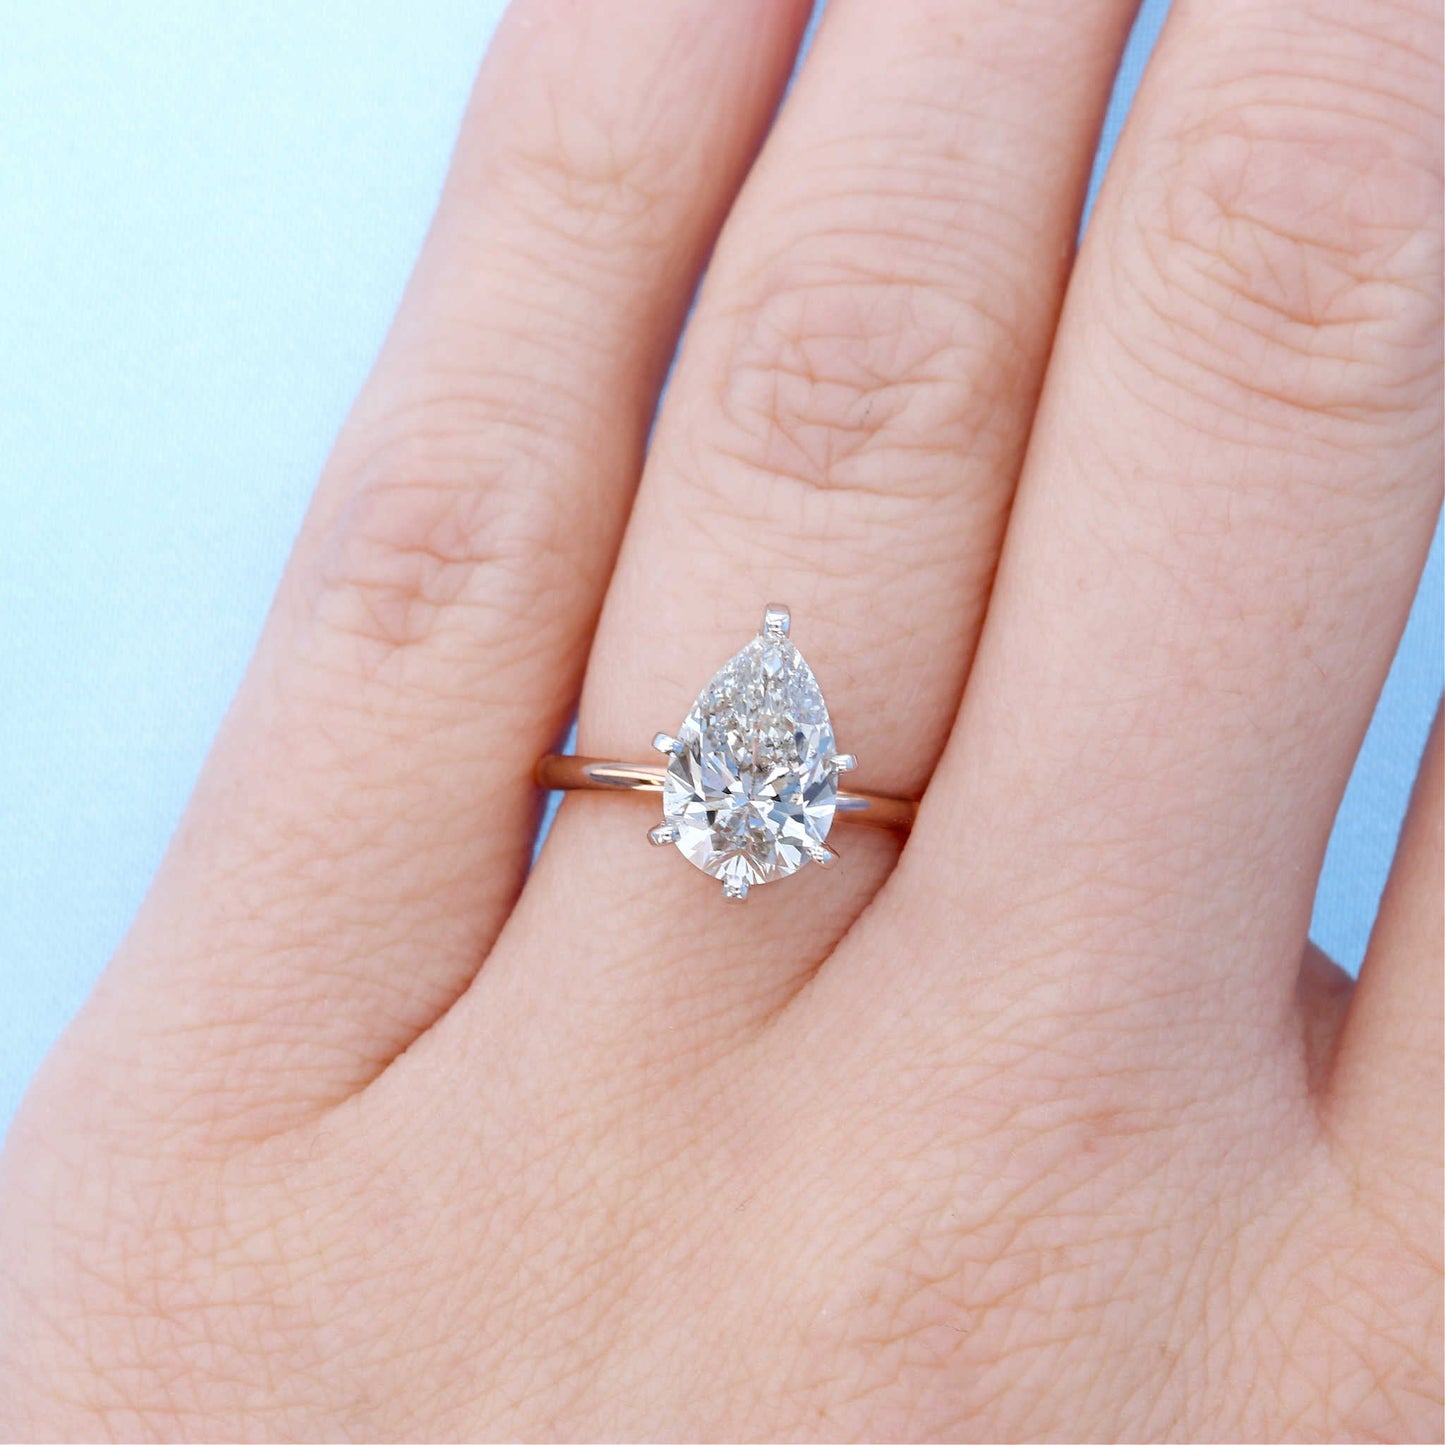 Pear Solitaire Diamond Engagement Ring on a Finger